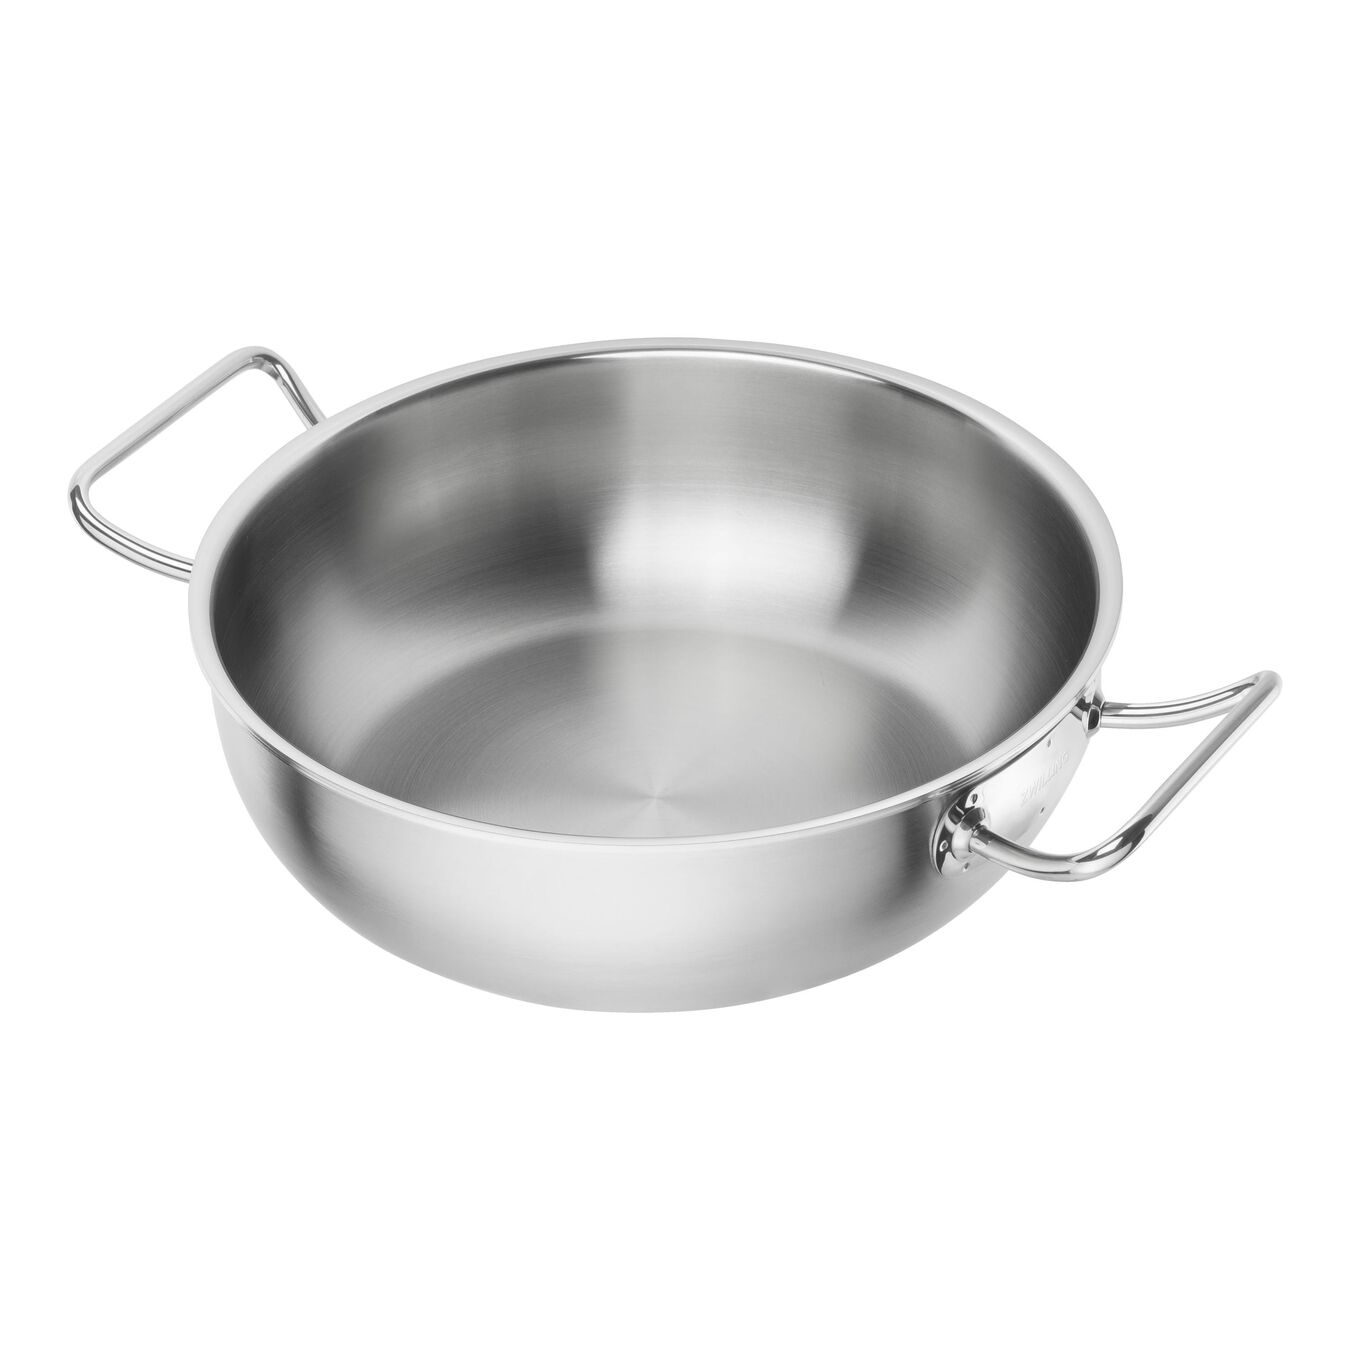 30 cm 18/10 Stainless Steel Wok,,large 1